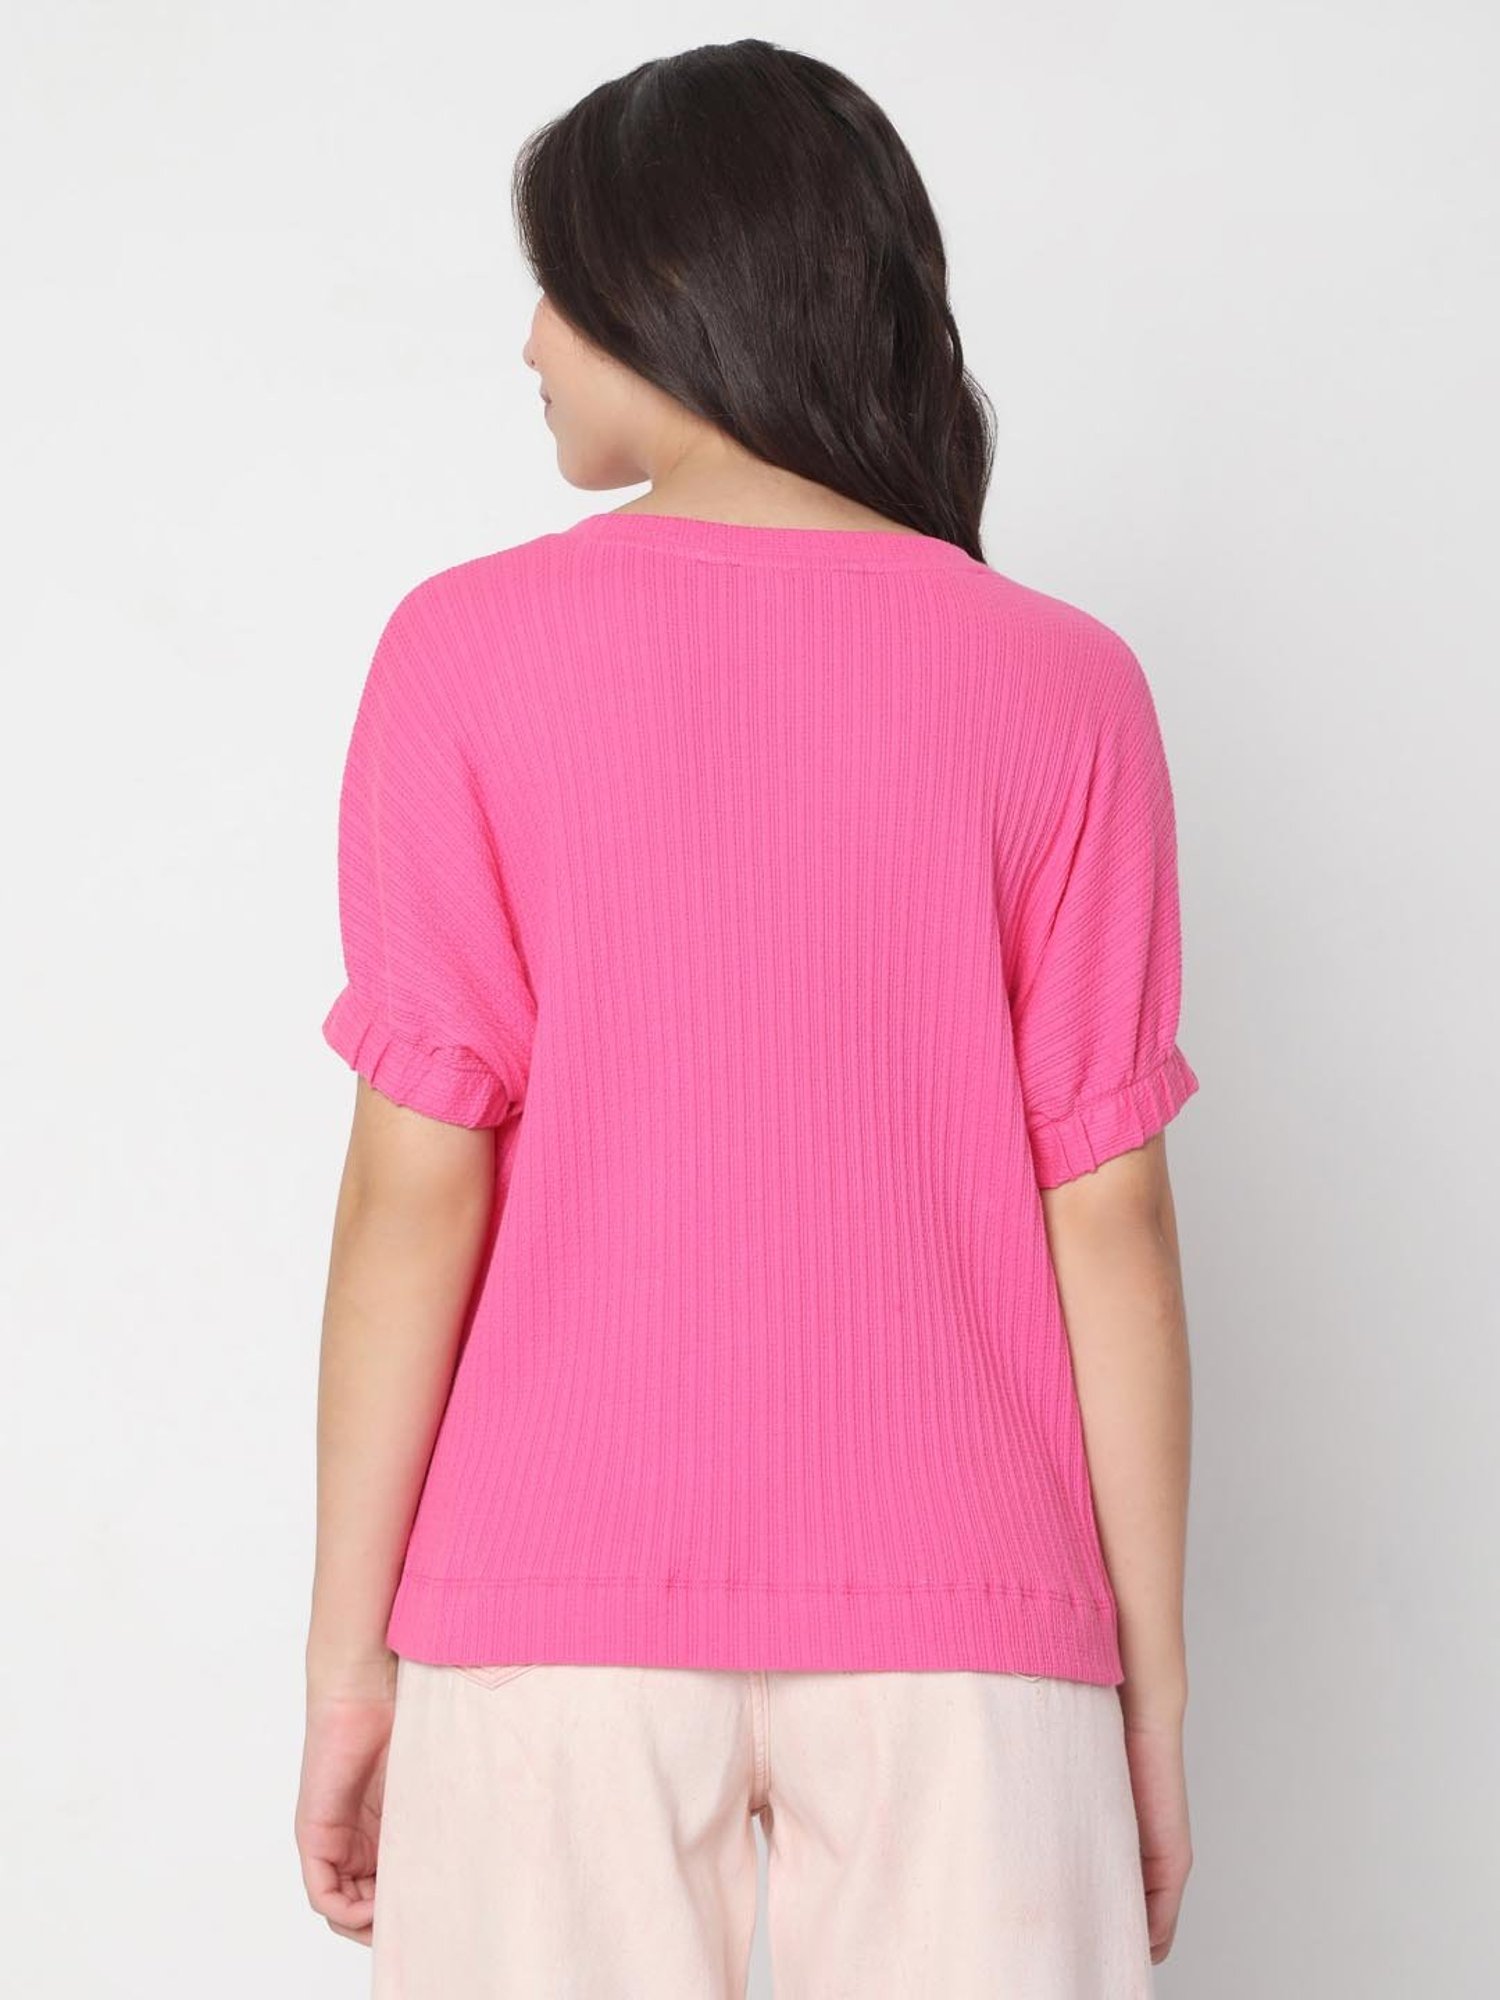 People by Pantaloons Pink Cotton Top